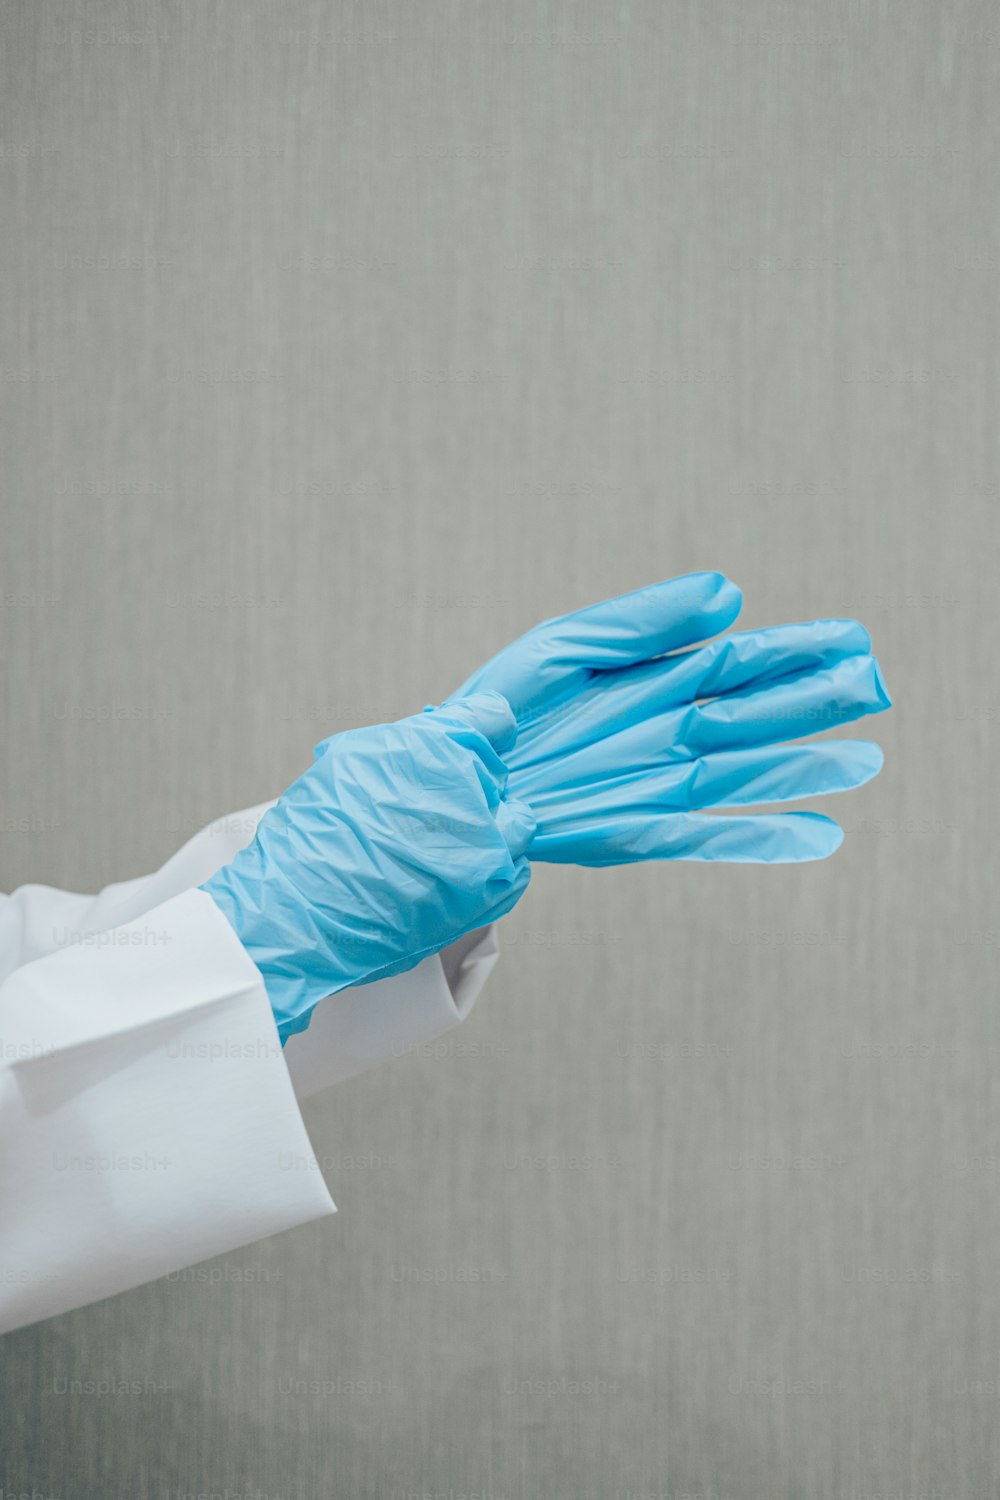 a person in a white coat and blue gloves